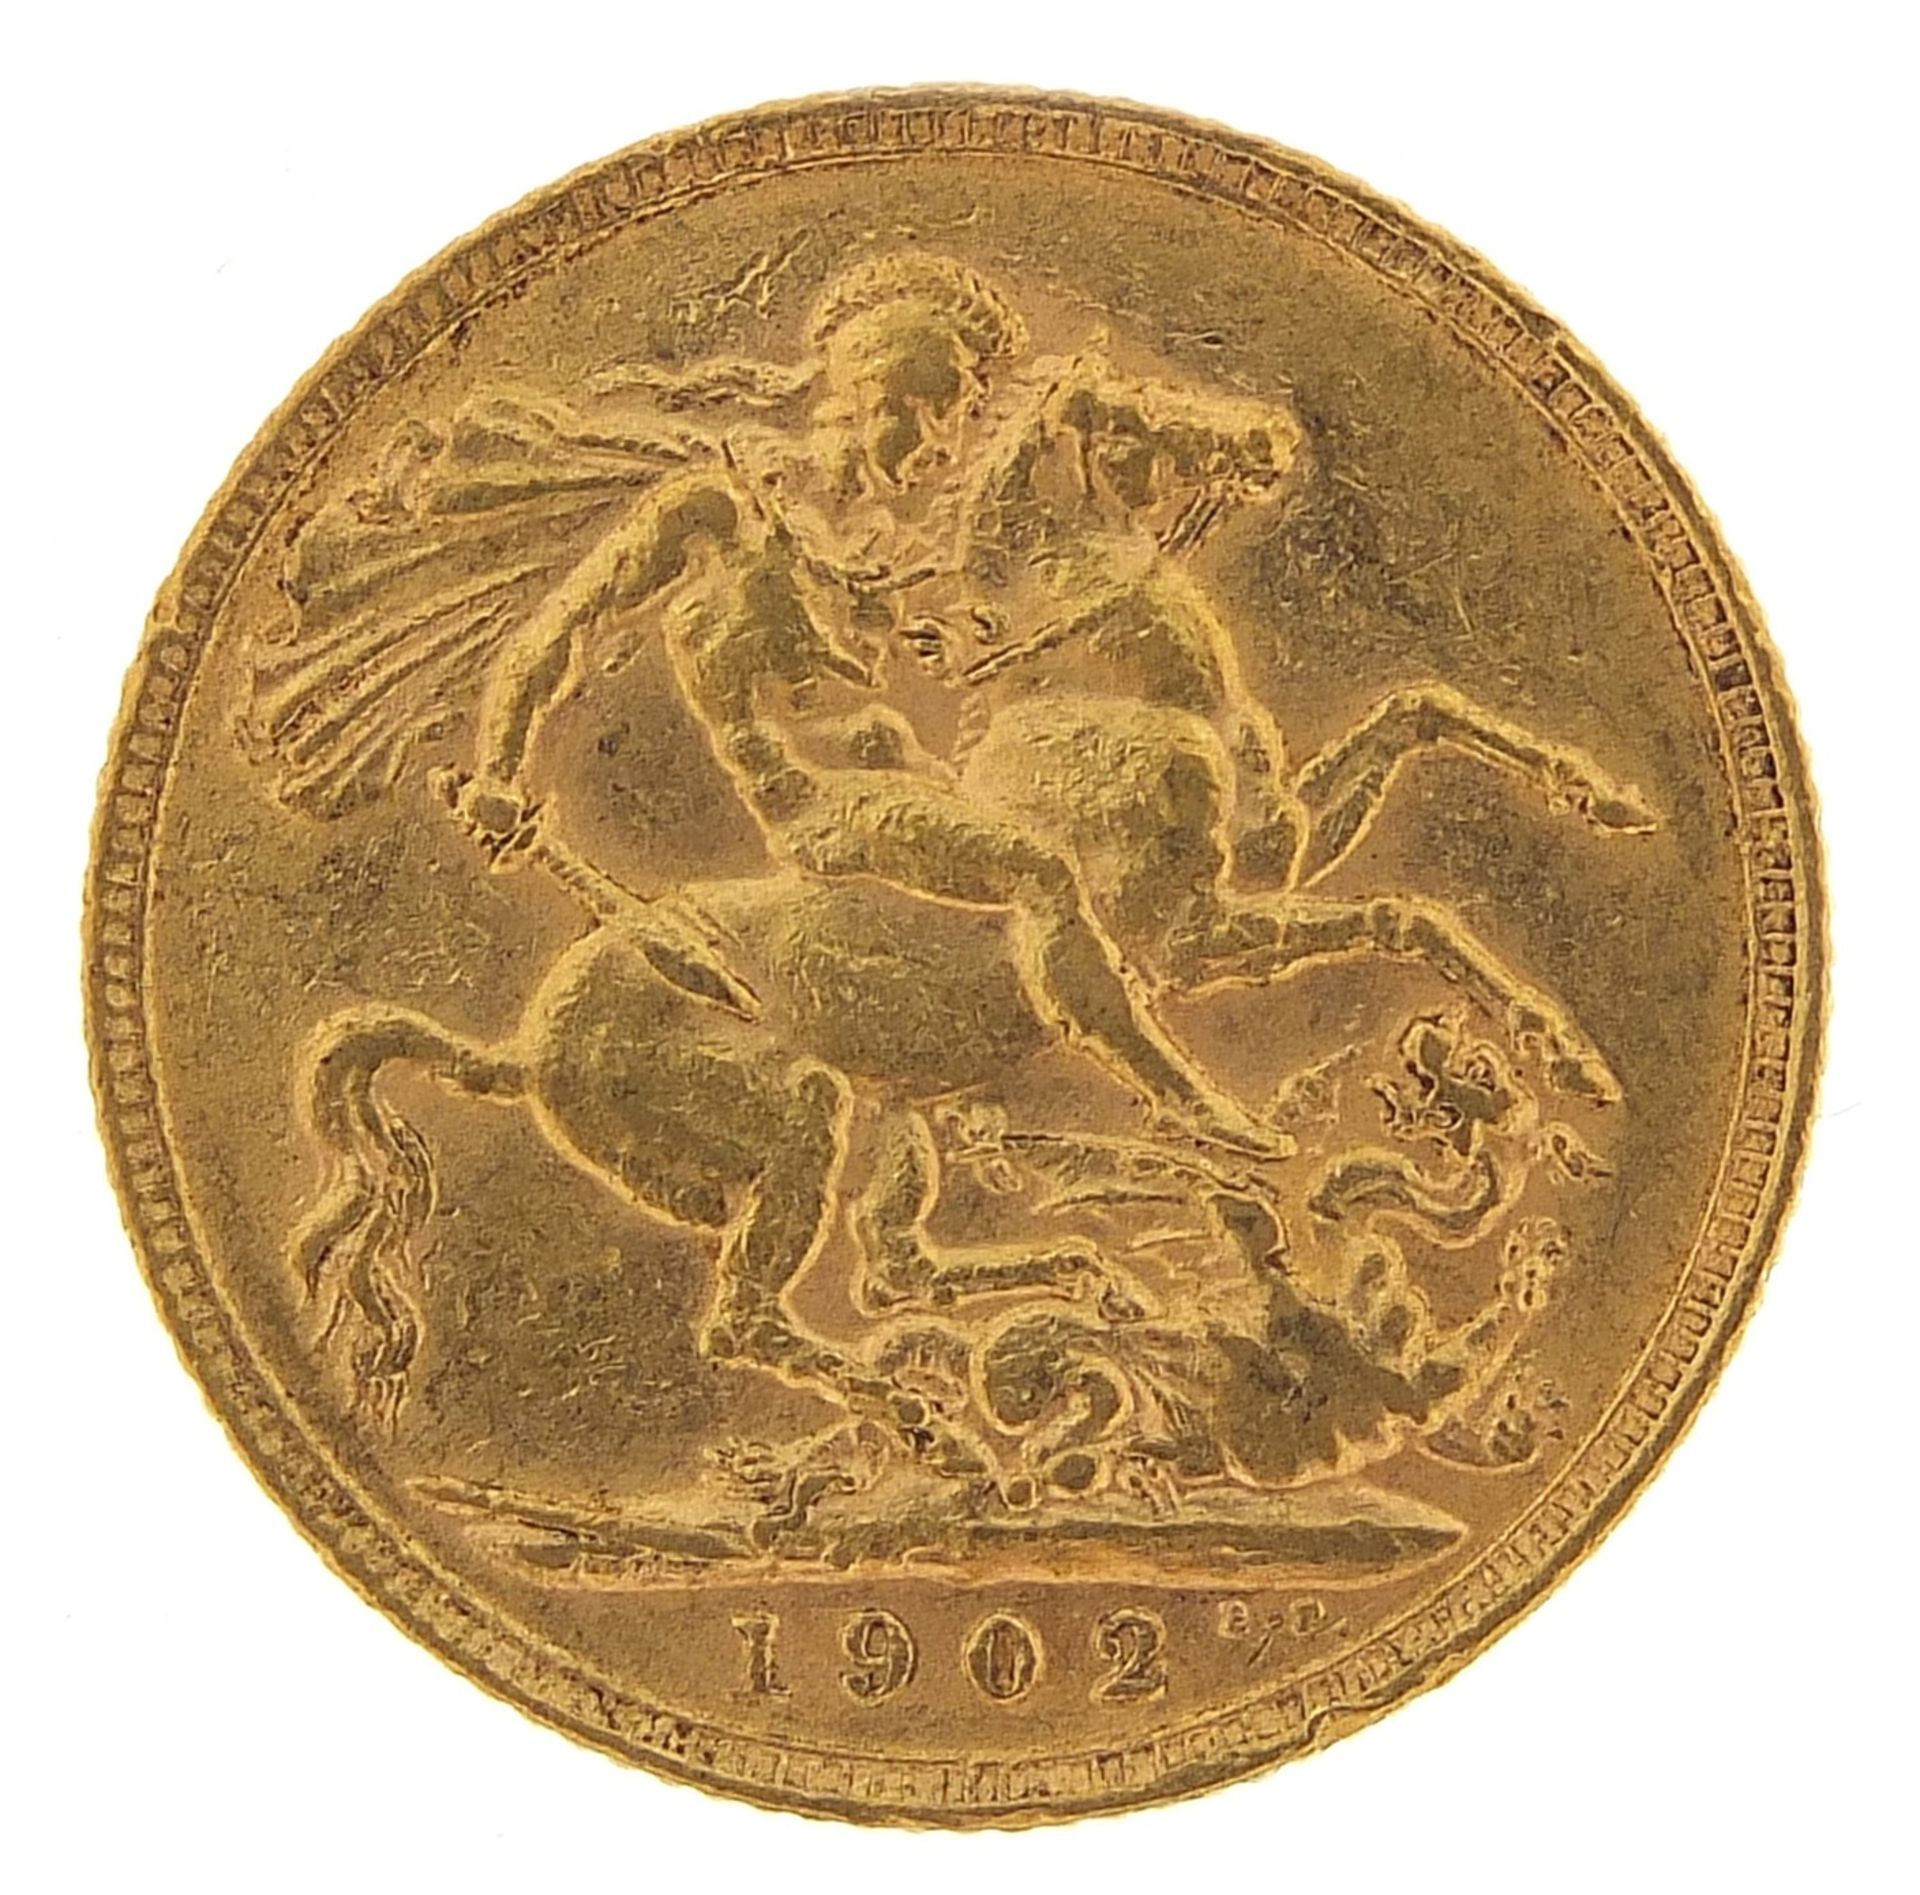 Edward VII 1902 gold sovereign - this lot is sold without buyer's premium